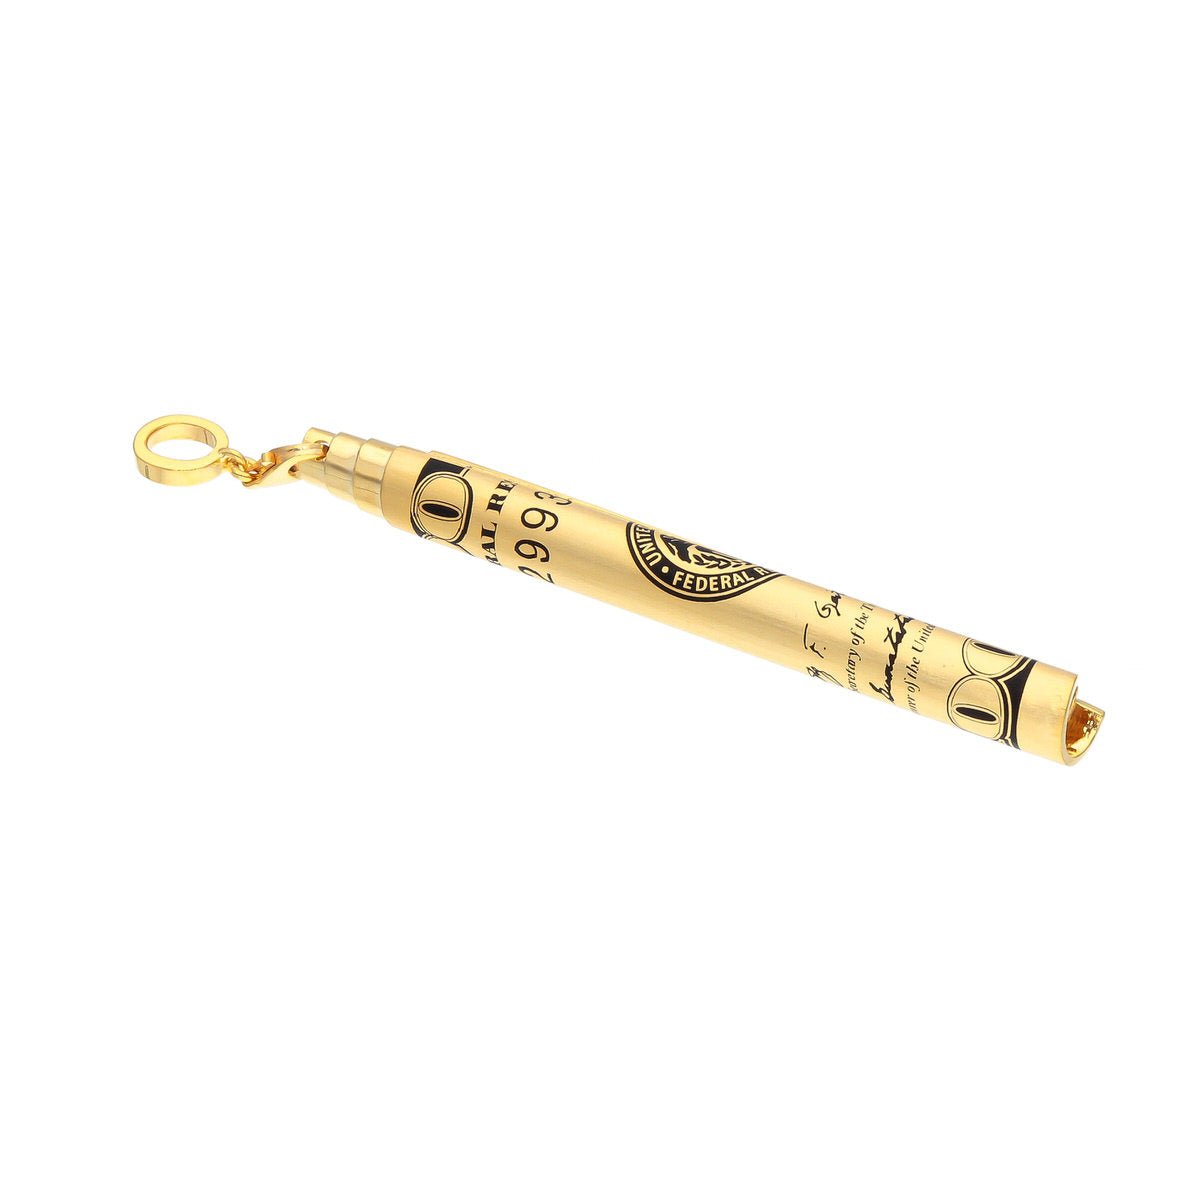 Rolled Up 100 Dollar Bill (14K YELLOW GOLD) - IF & Co. Custom Jewelers